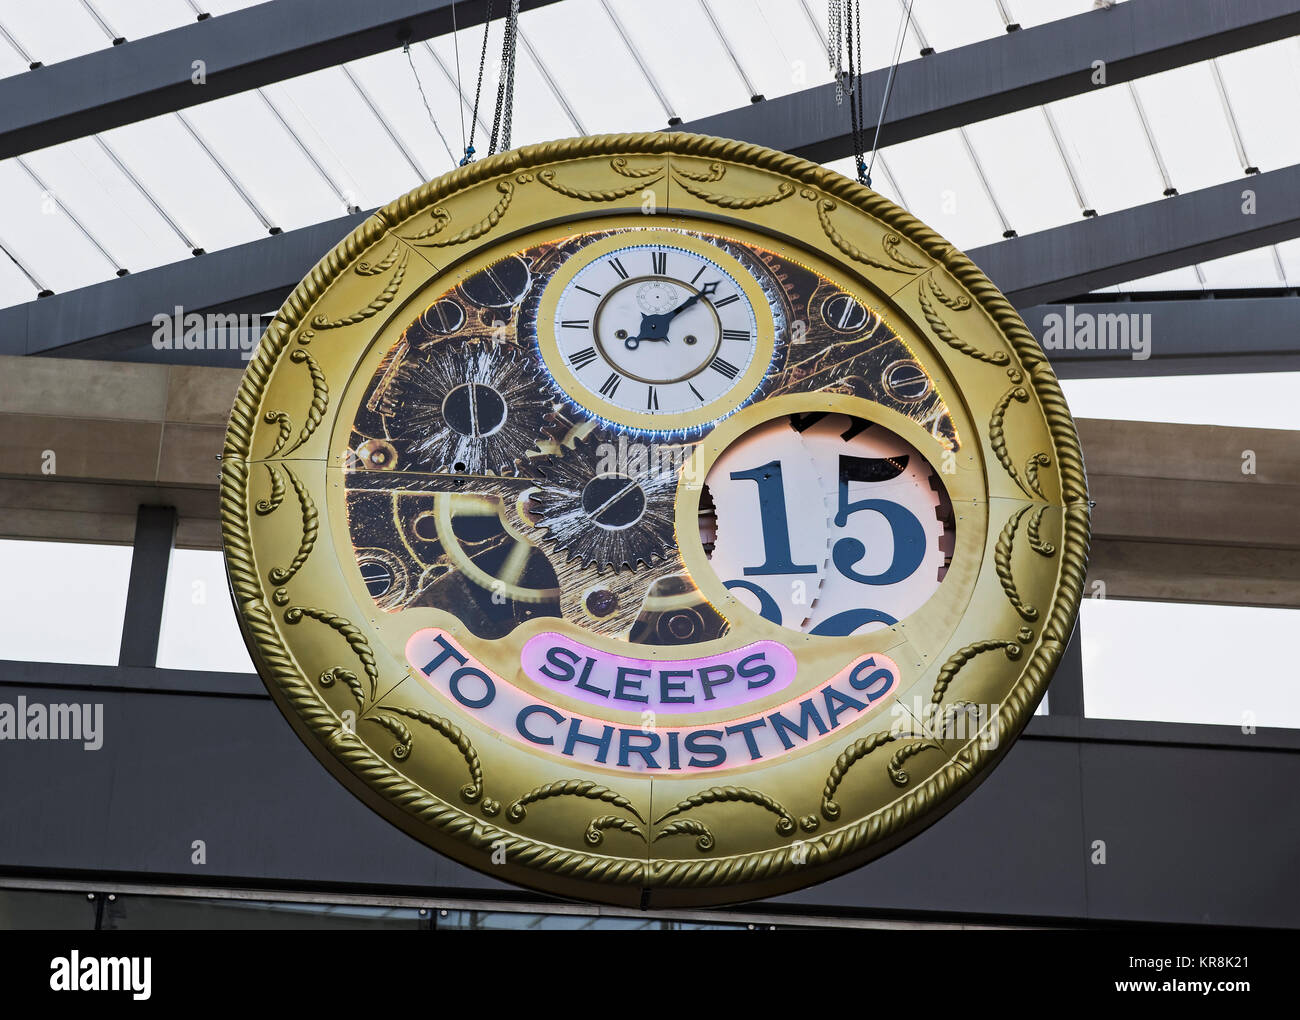 Clock in the likeness of a pocket watch counting down sleeps to Christmas at the entrance to Eldon square shopping centre on Northumberland Street, UK Stock Photo